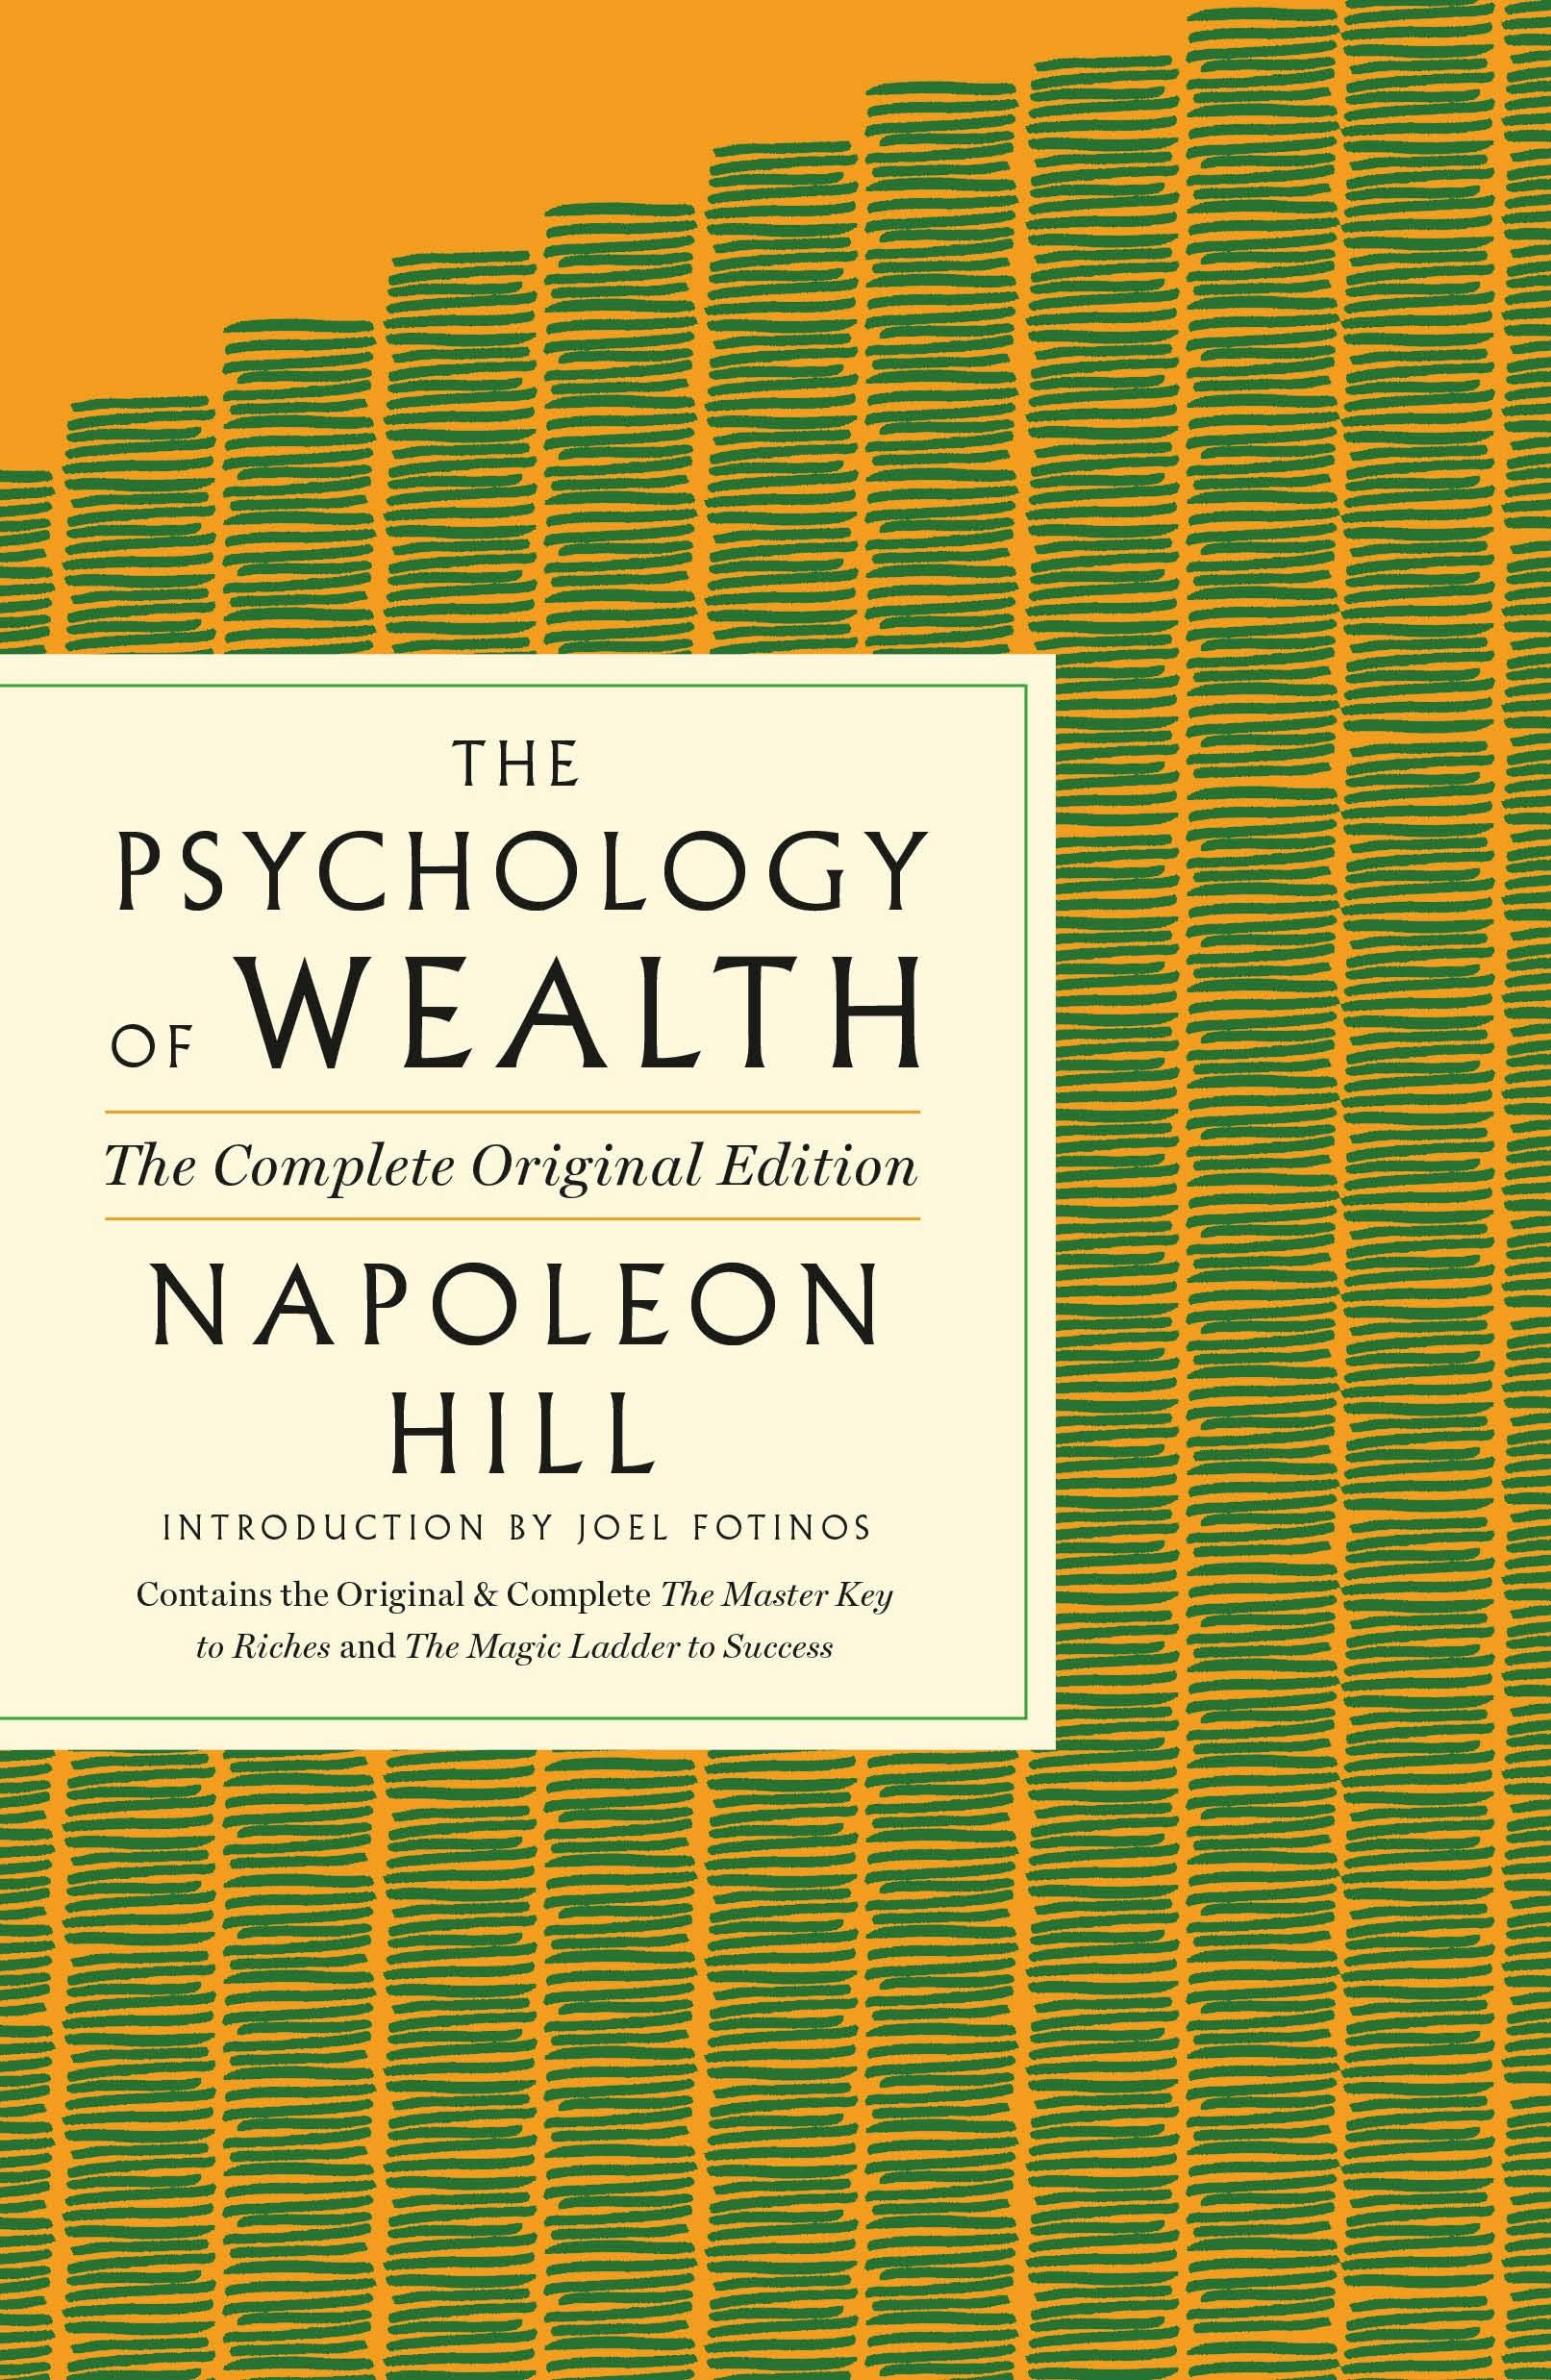 The Psychology of Wealth